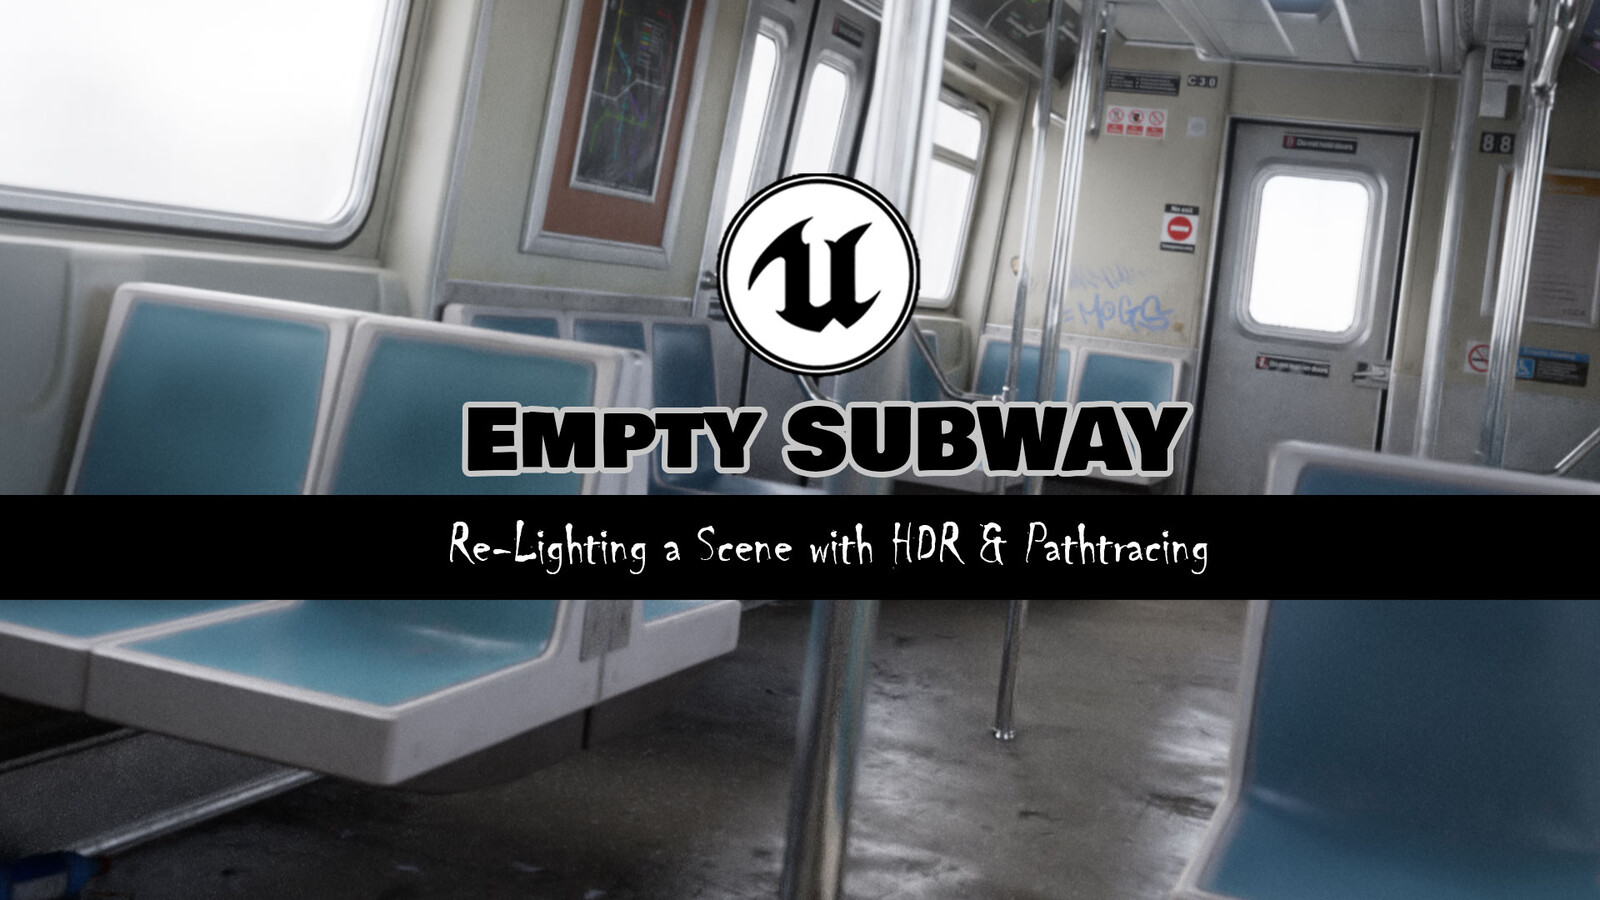 The Empty Subway: An UNREAL trip.